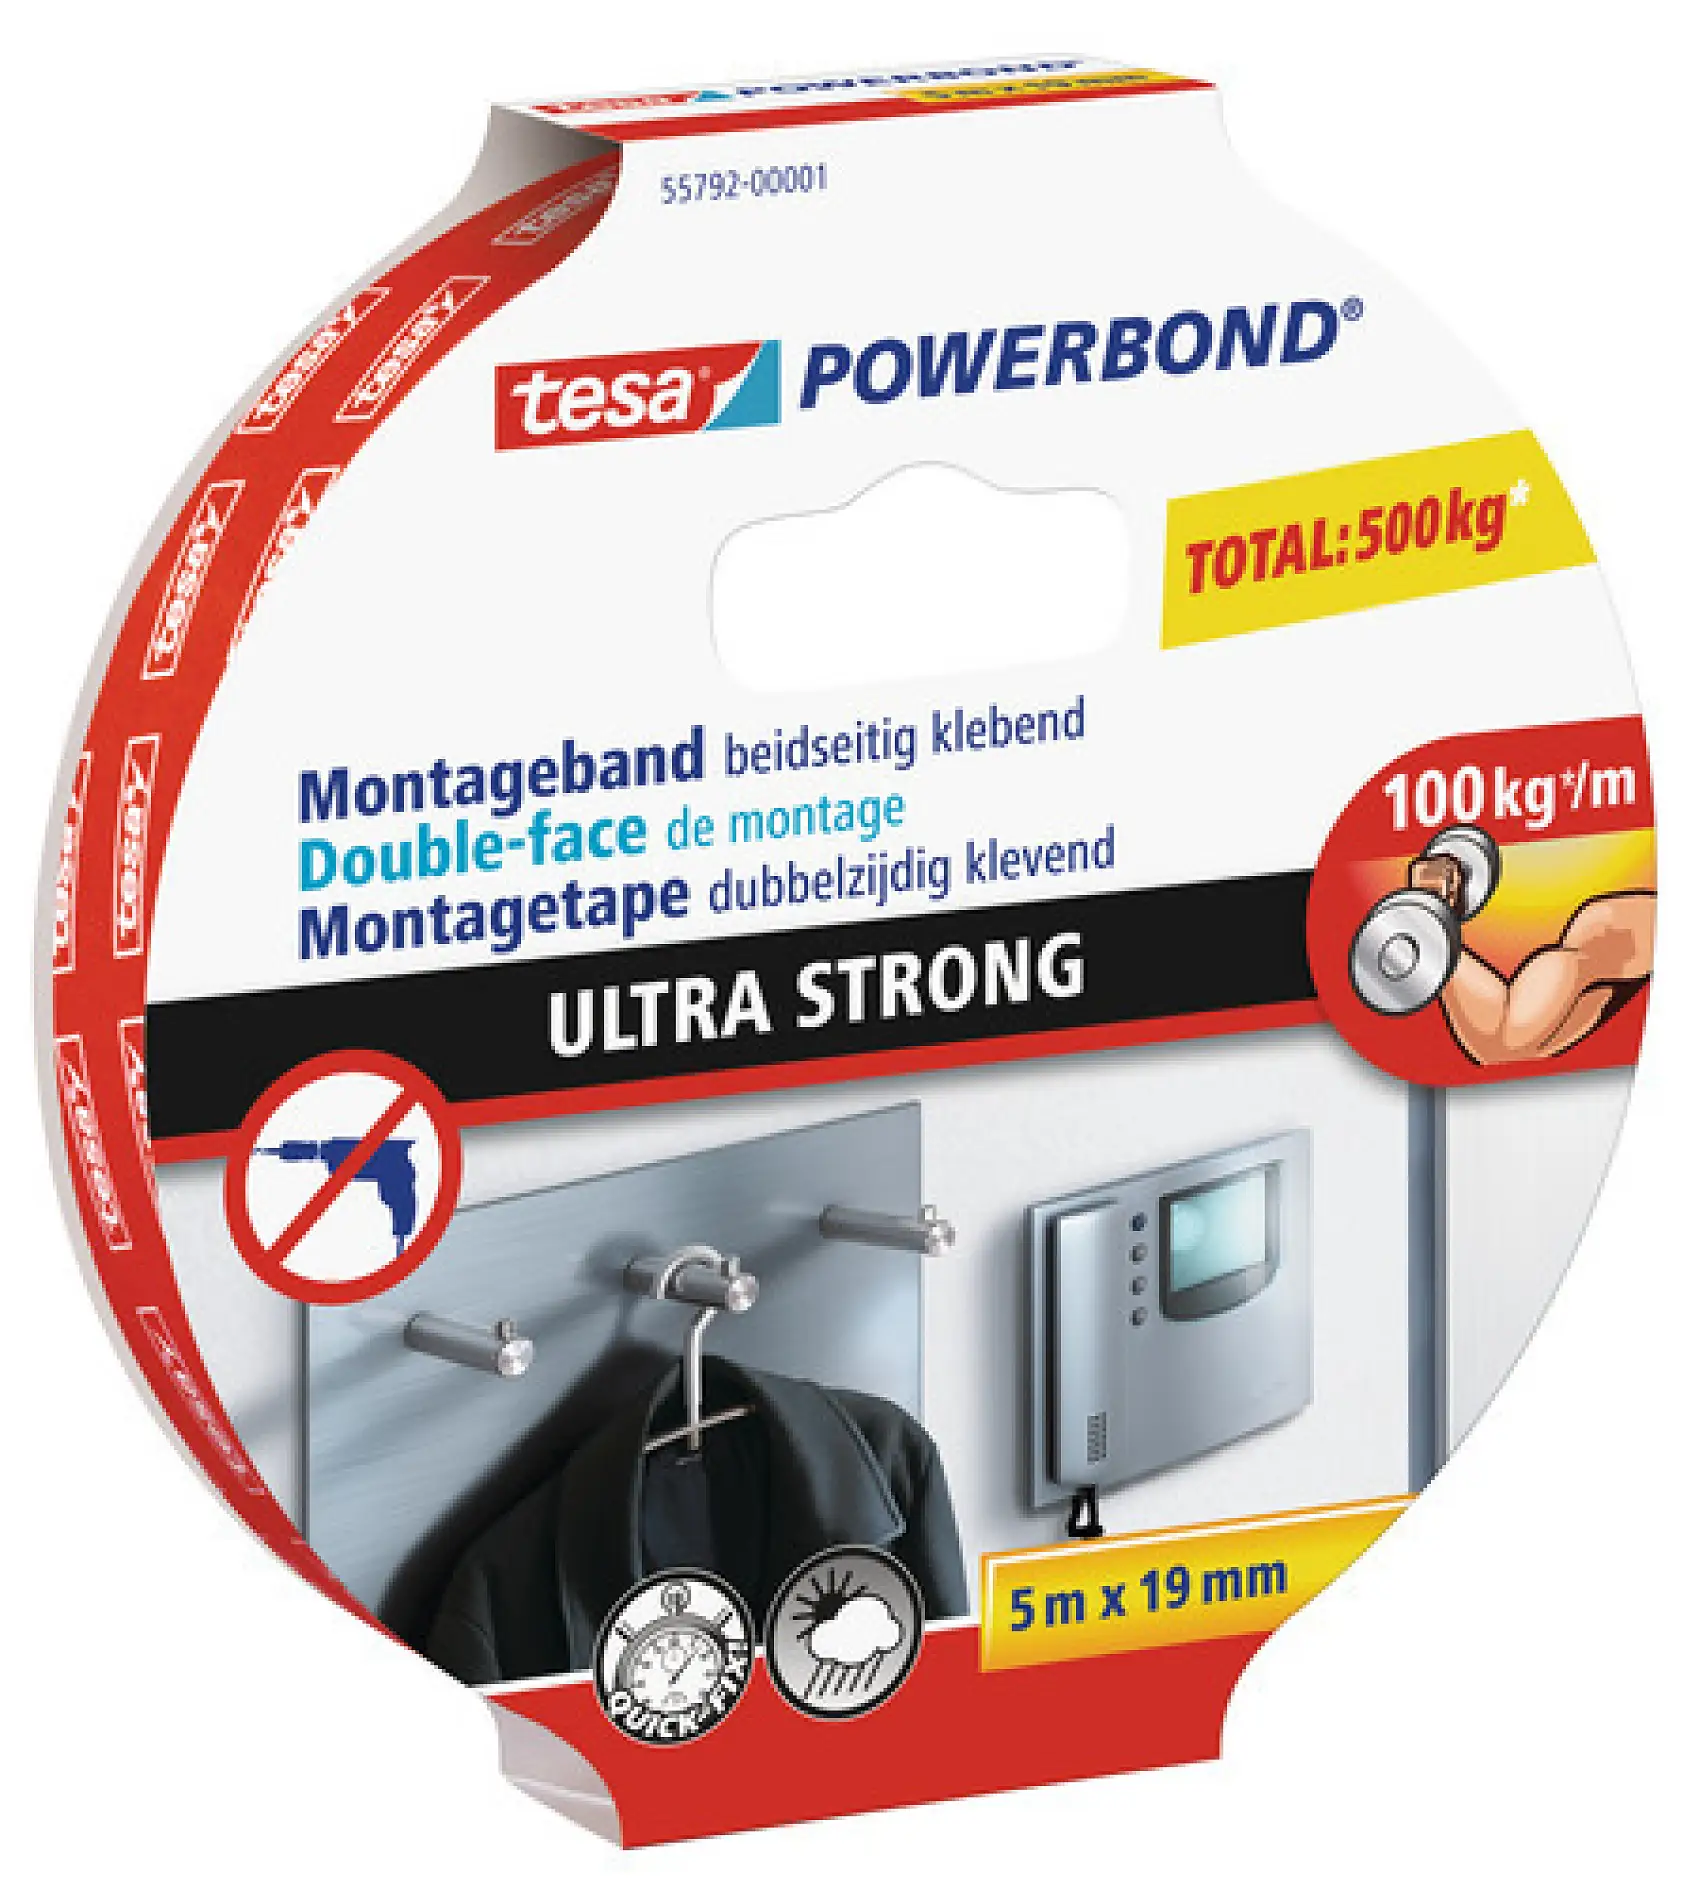 With tesa® Powerbond Ultra Strong you can hang heavy, flat objects without the need to drill or use any nails or screws. This double-sided mounting tape sticks perfectly onto firm, smooth surfaces including tiles, wood and most plastics.
It can hold objects with a thickness of up to 10 mm and a weight of up to 6 kg. In ideal conditions, a strip of just 10 cm is enough to hold a weight of up to 10 kg. Provided the tape isn't exposed to water or direct sunlight, it will give permanent, reliable ultra-strong bonding power.